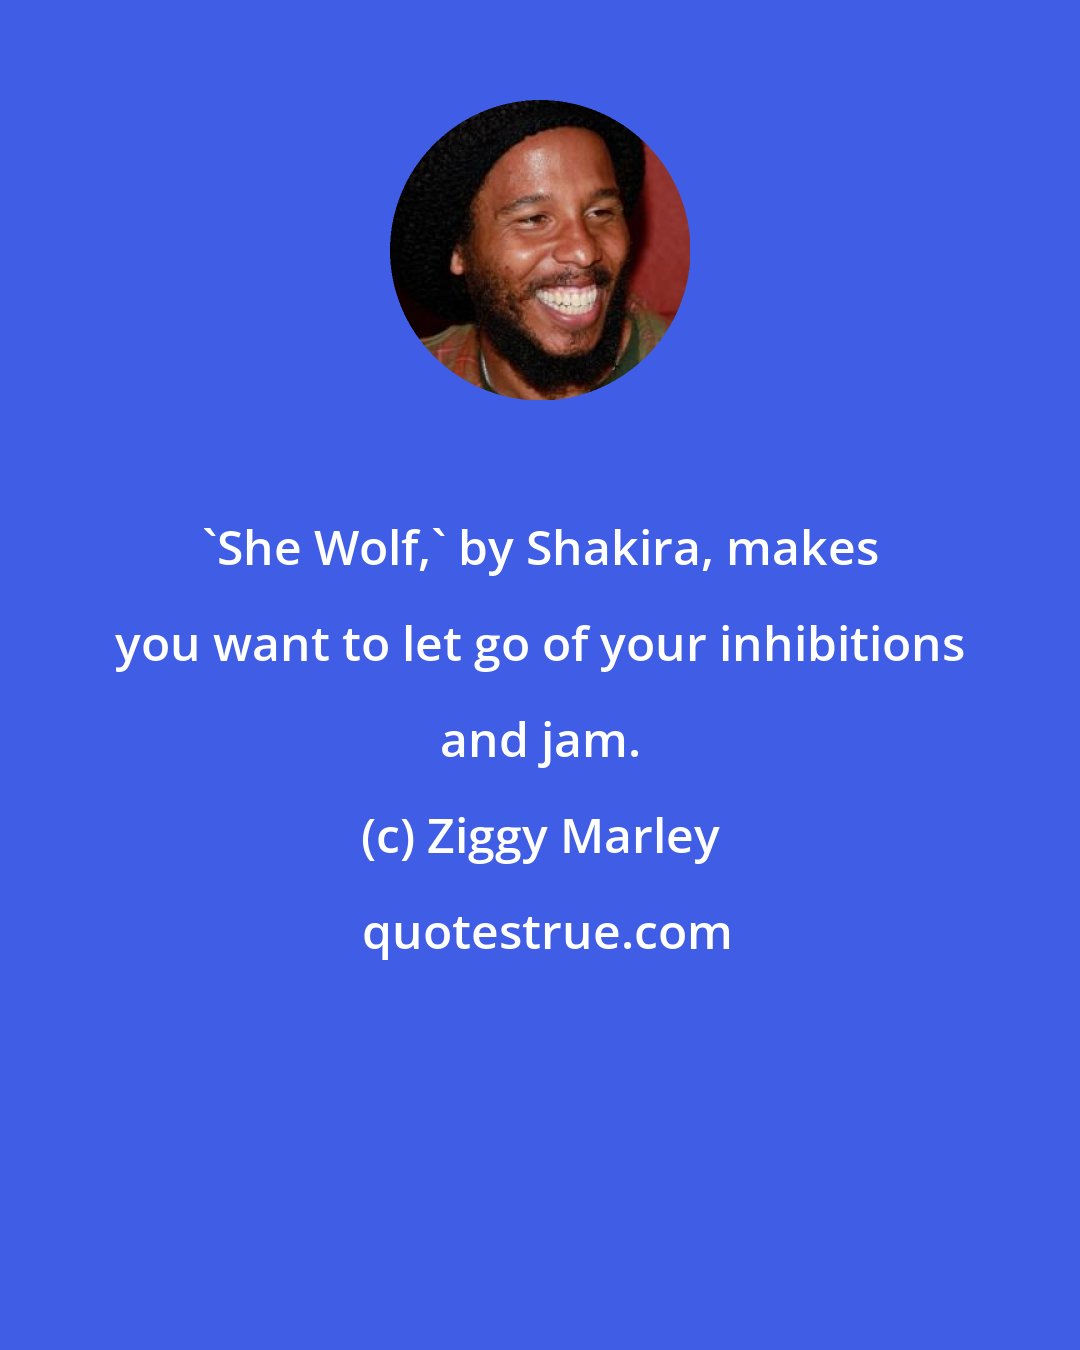 Ziggy Marley: 'She Wolf,' by Shakira, makes you want to let go of your inhibitions and jam.